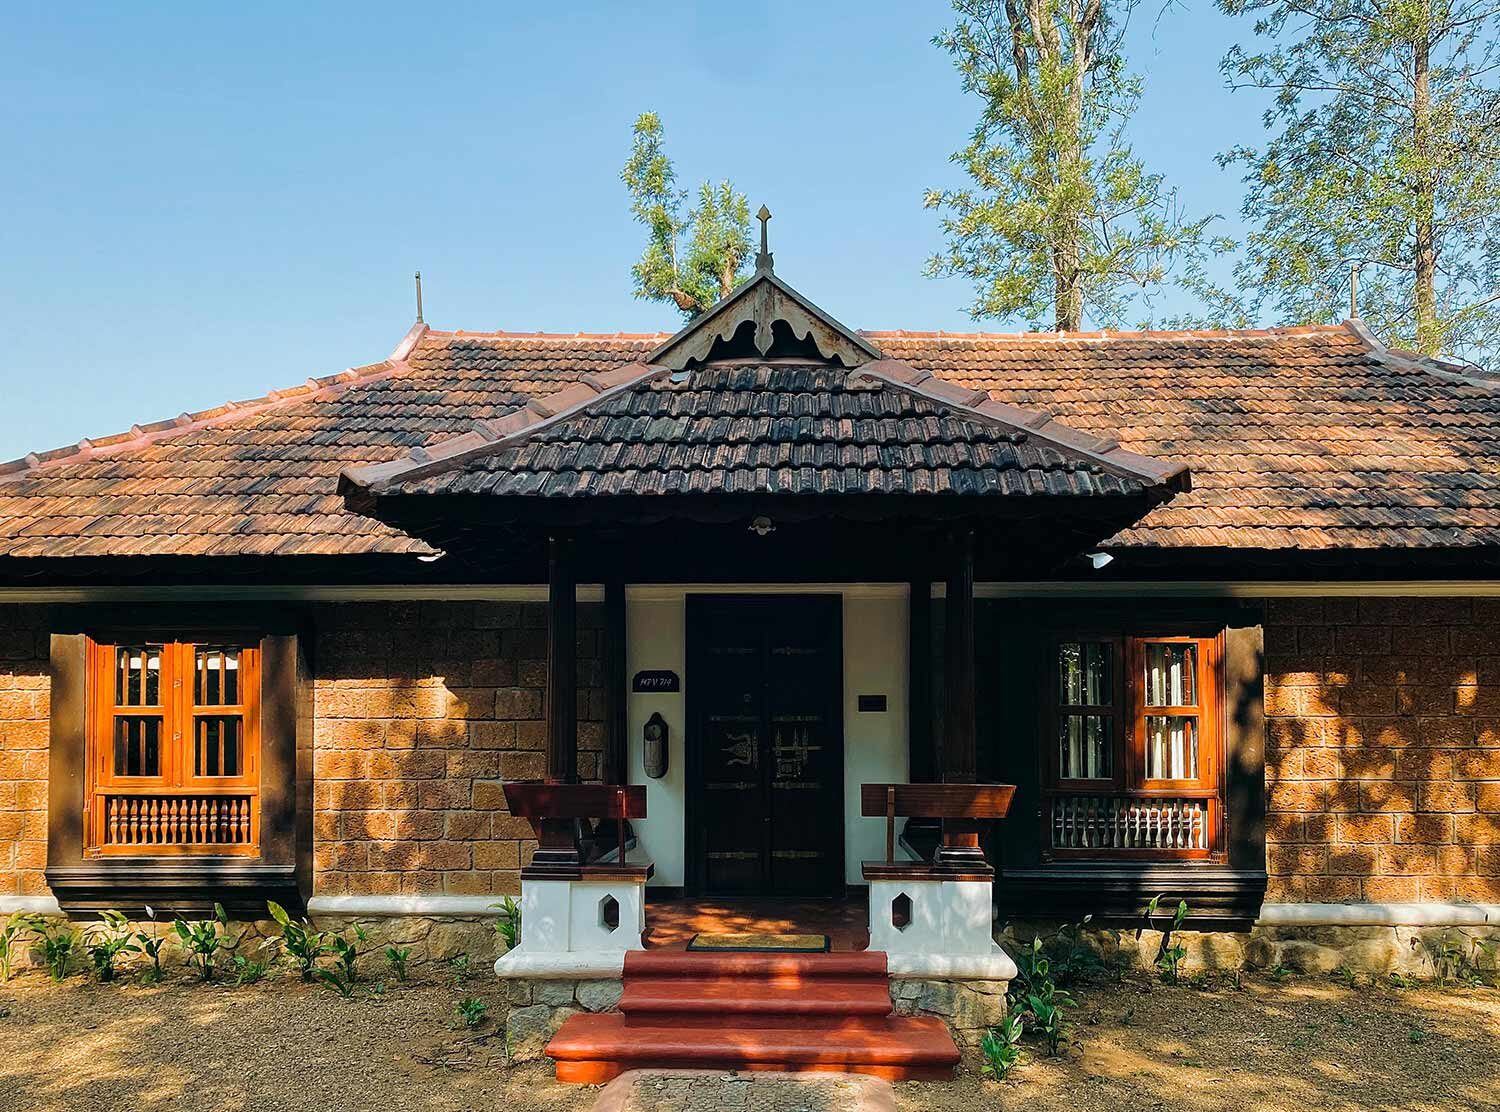 Evolve Back, Coorg Our abode for the three days — their classic Heritage Pool Villa